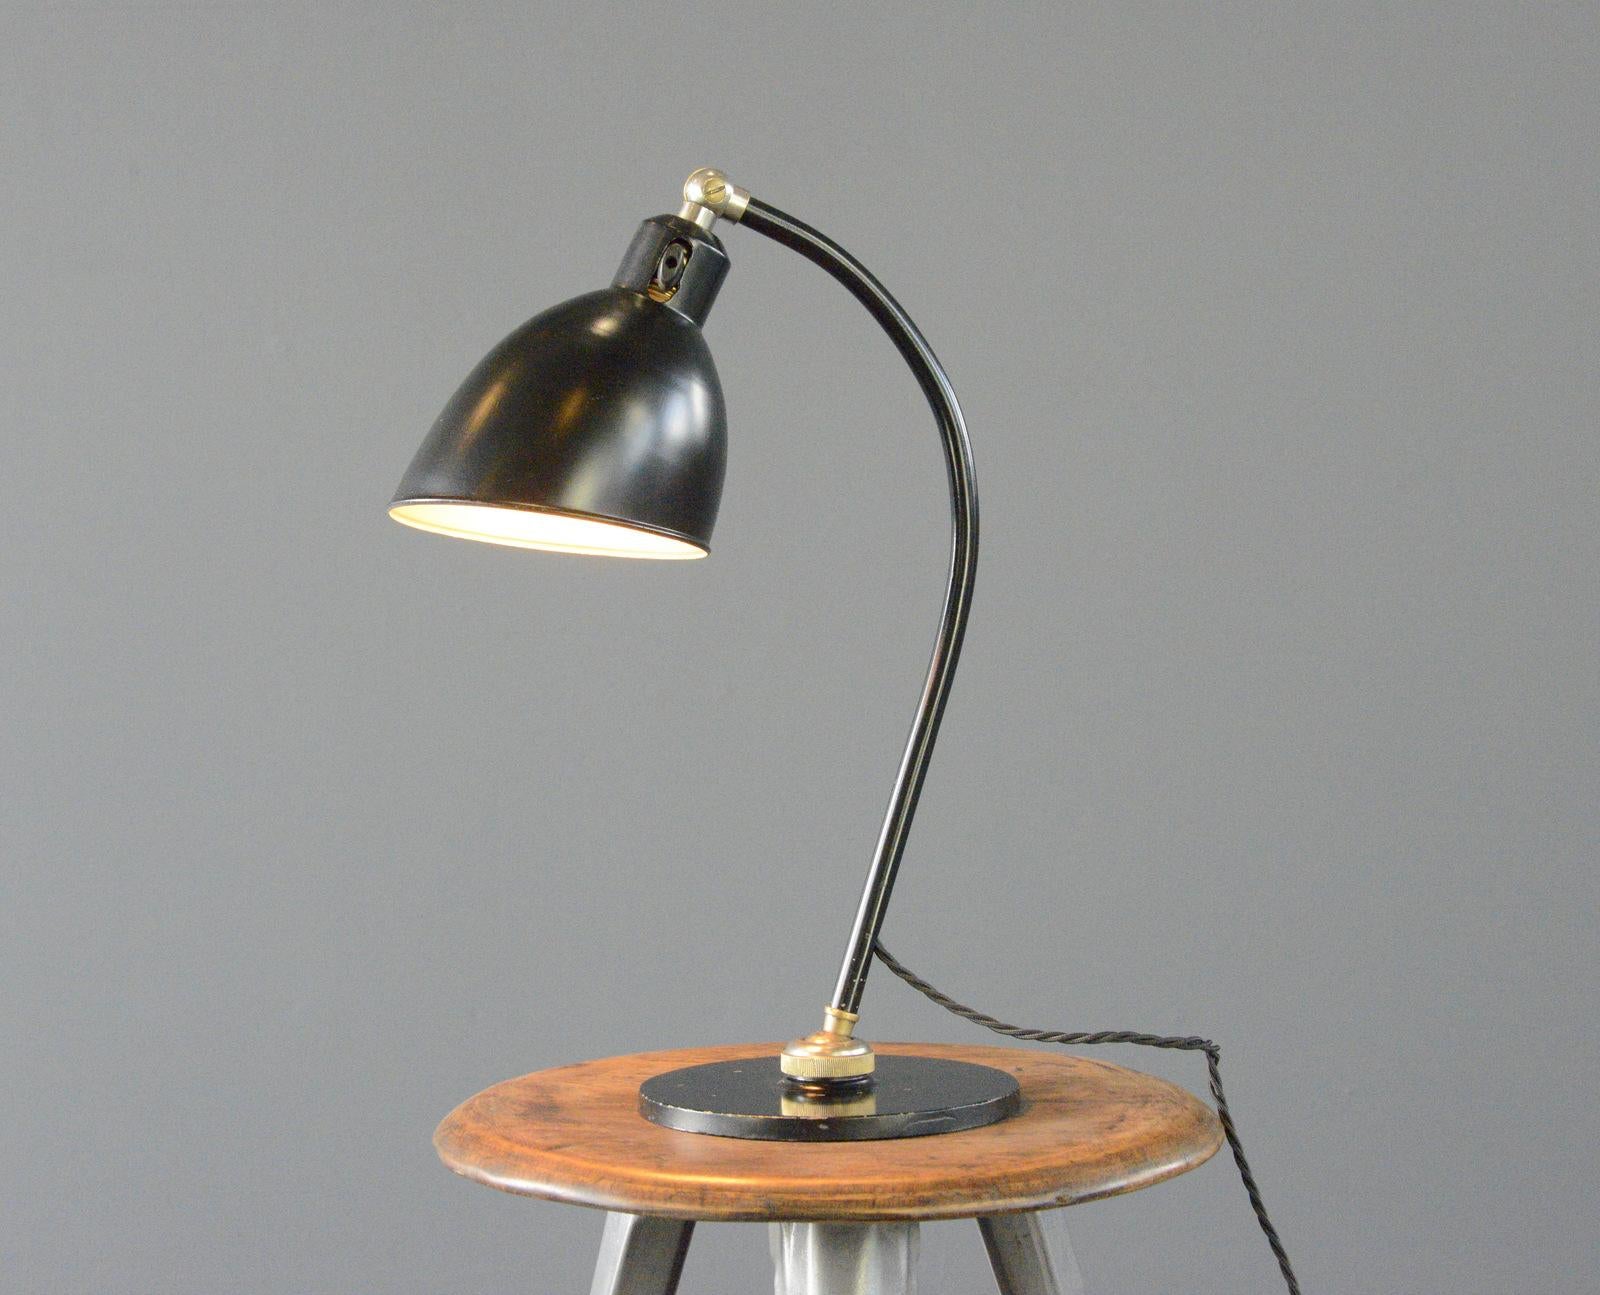 Polo Popular Desk Lamp By Christian Dell For BUR

- Heavy steel base
- Ball and socket joint allows for articulated movement
- Steel shade and arm
- Takes E27 fitting bulbs
- On/Off toggle switch on the shade
- Designed by Christian Dell
- Produced